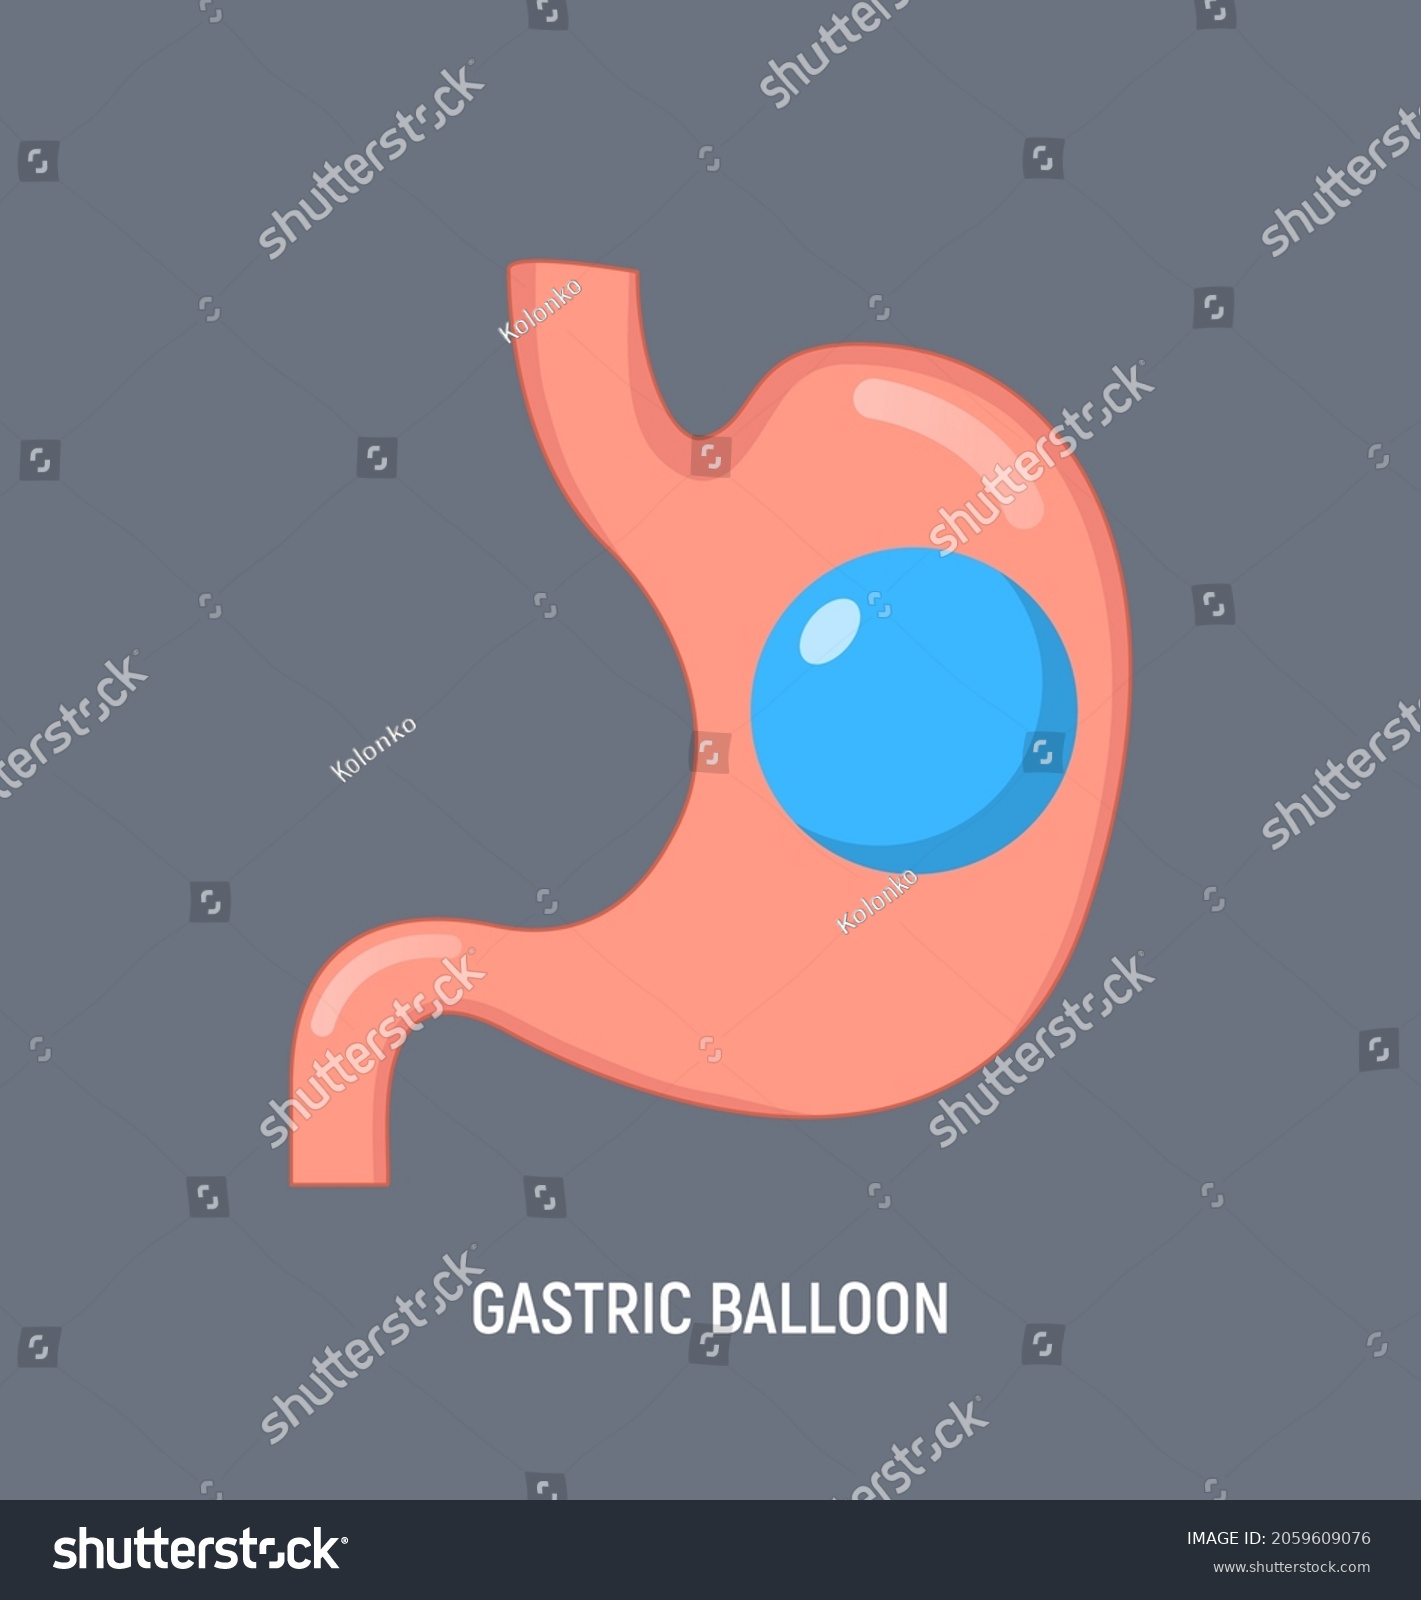 SVG of Gastric balloon weight loss intragastric surgery. Stomach gastric balloon operation vector icon svg